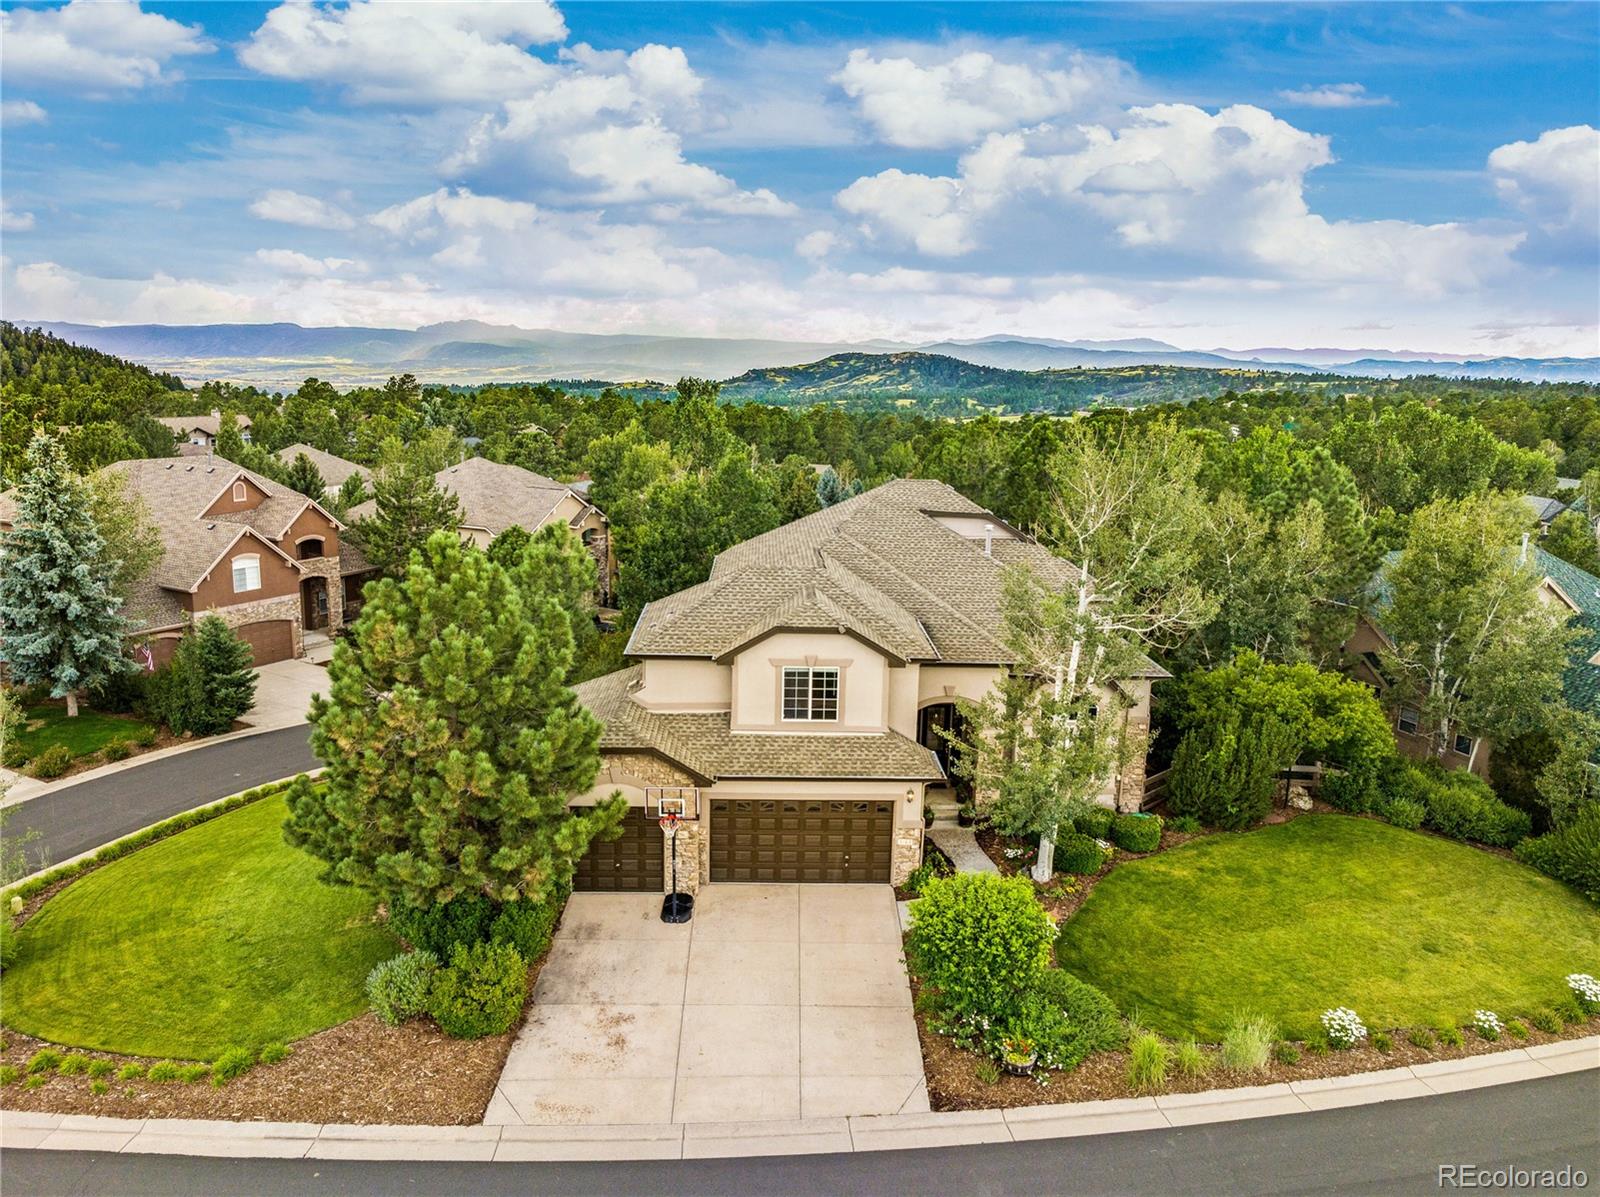 7163  Forest Ridge Circle, castle pines MLS: 7495536 Beds: 4 Baths: 5 Price: $1,275,000